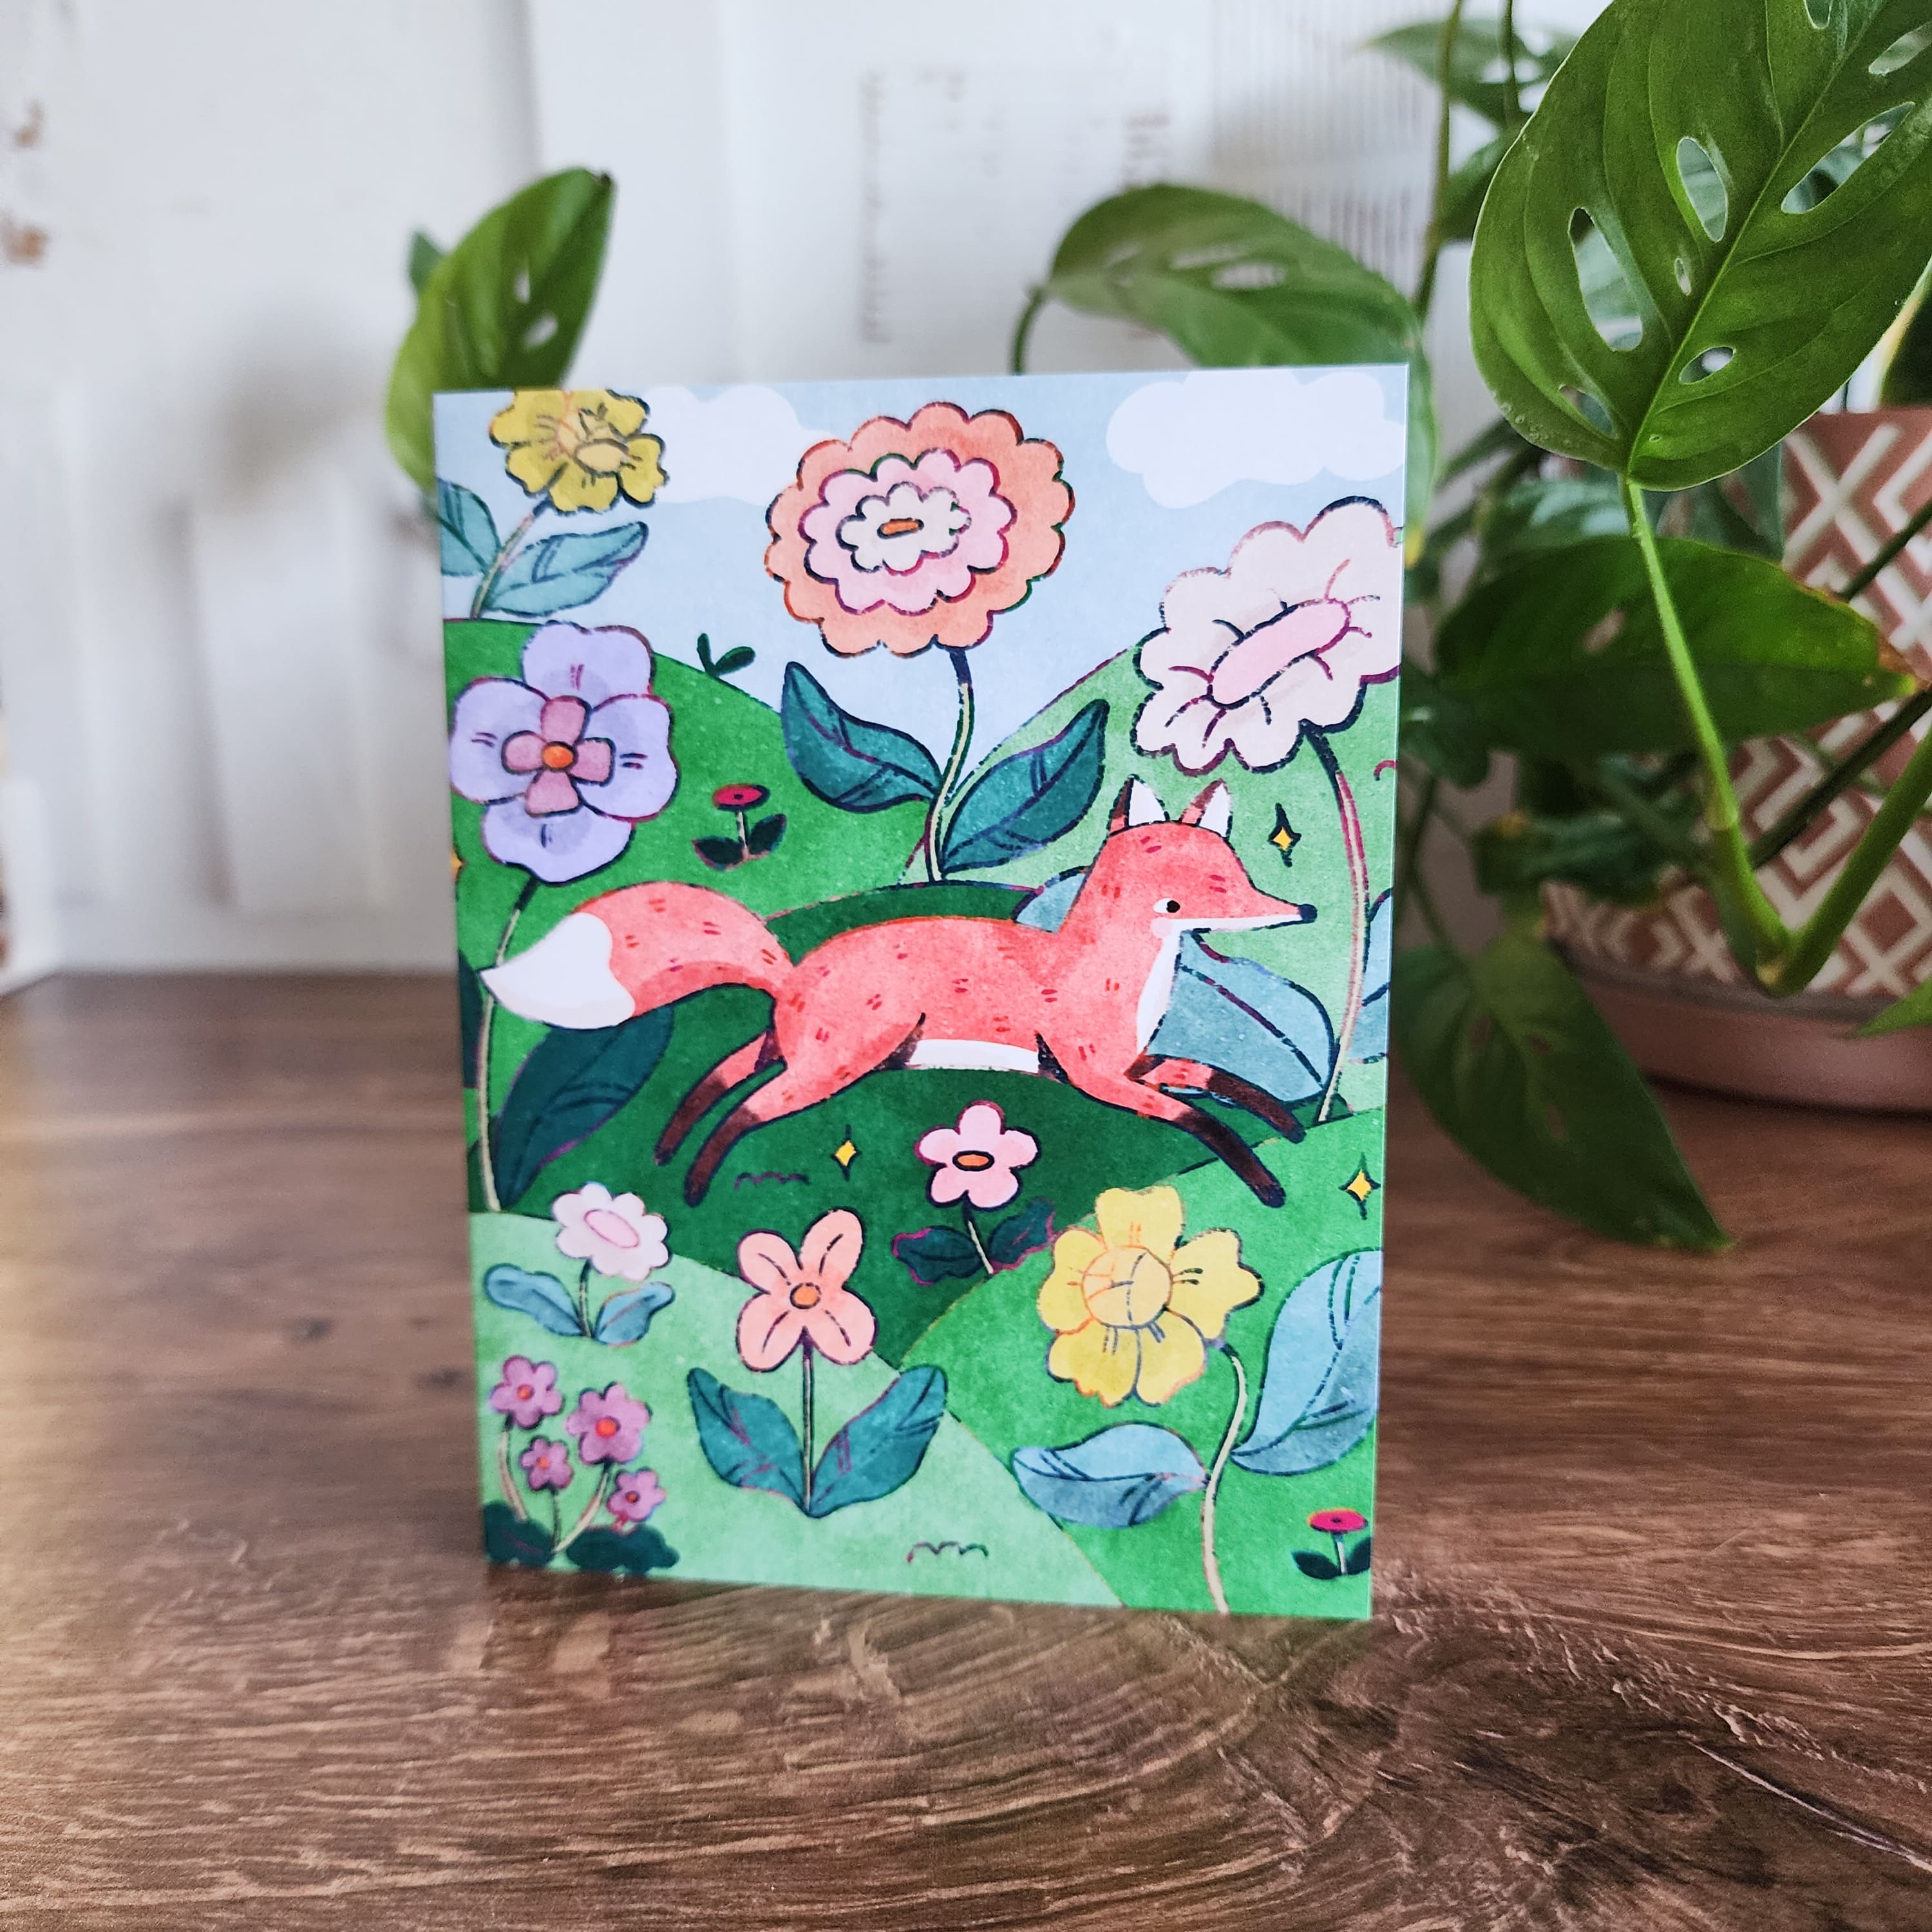 gretting card with a fox illustration sitting in front of a plant